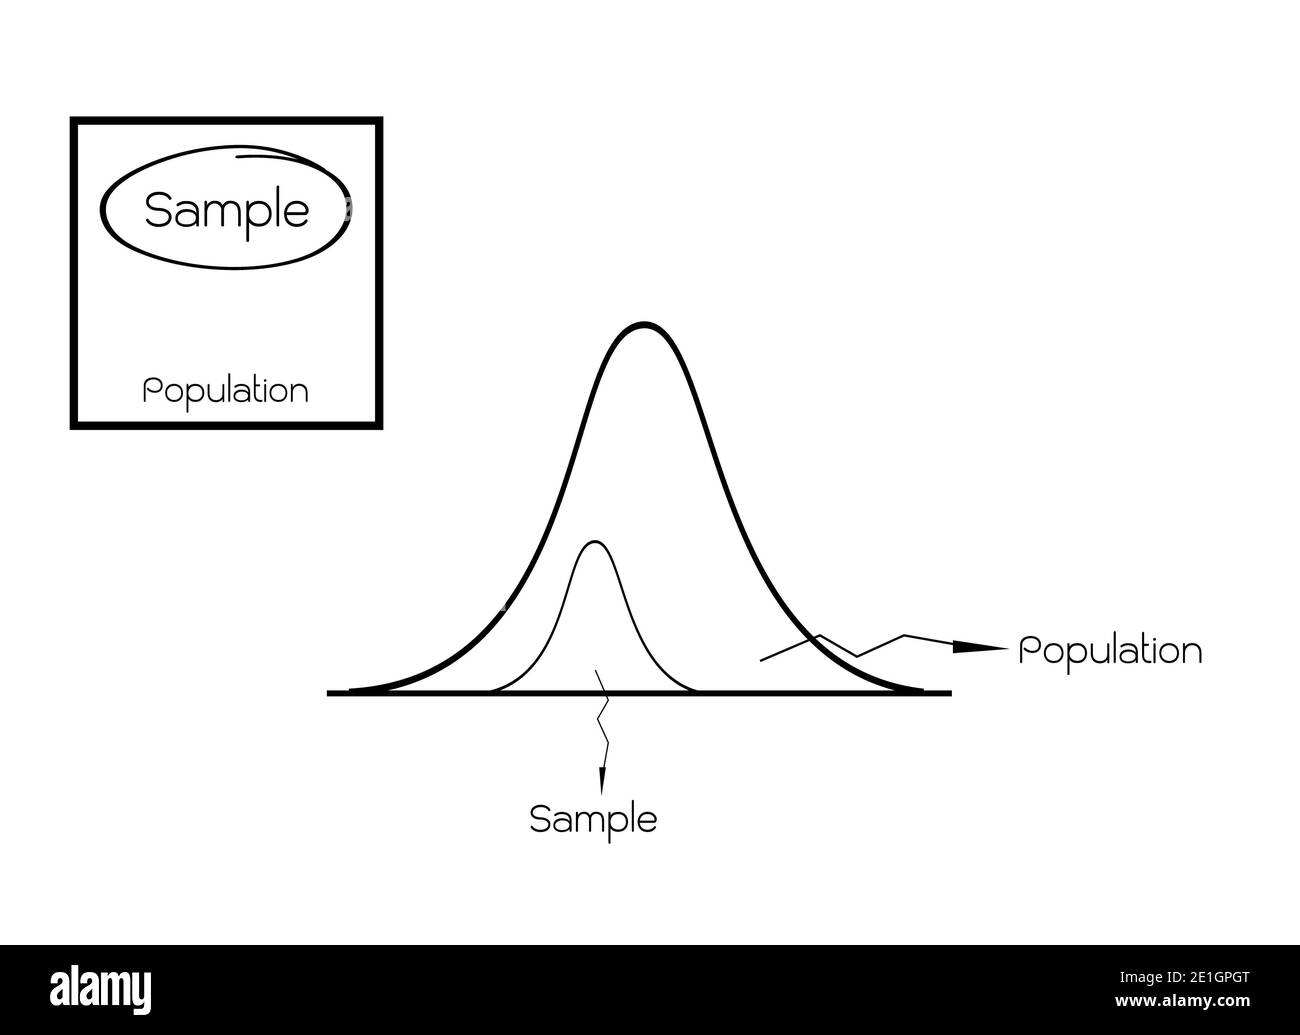 Business and Marketing or Research Process, Gaussian, Bell or Normal Distribution with The Sampling Methods of Selecting Sample of Elements From Targe Stock Photo